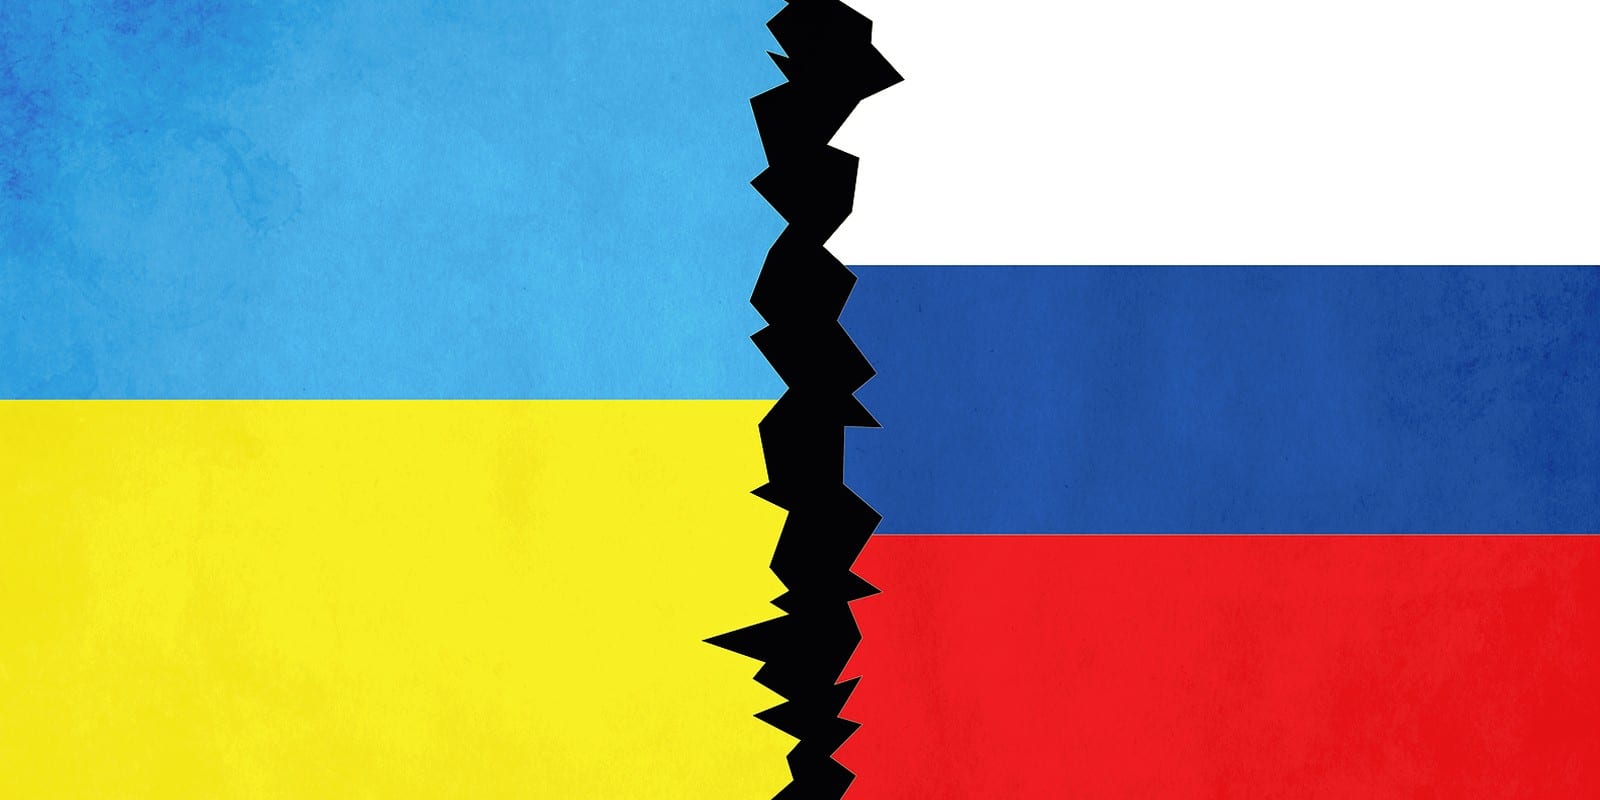 Save Download Preview State flags of the countries of Ukraine and Russia